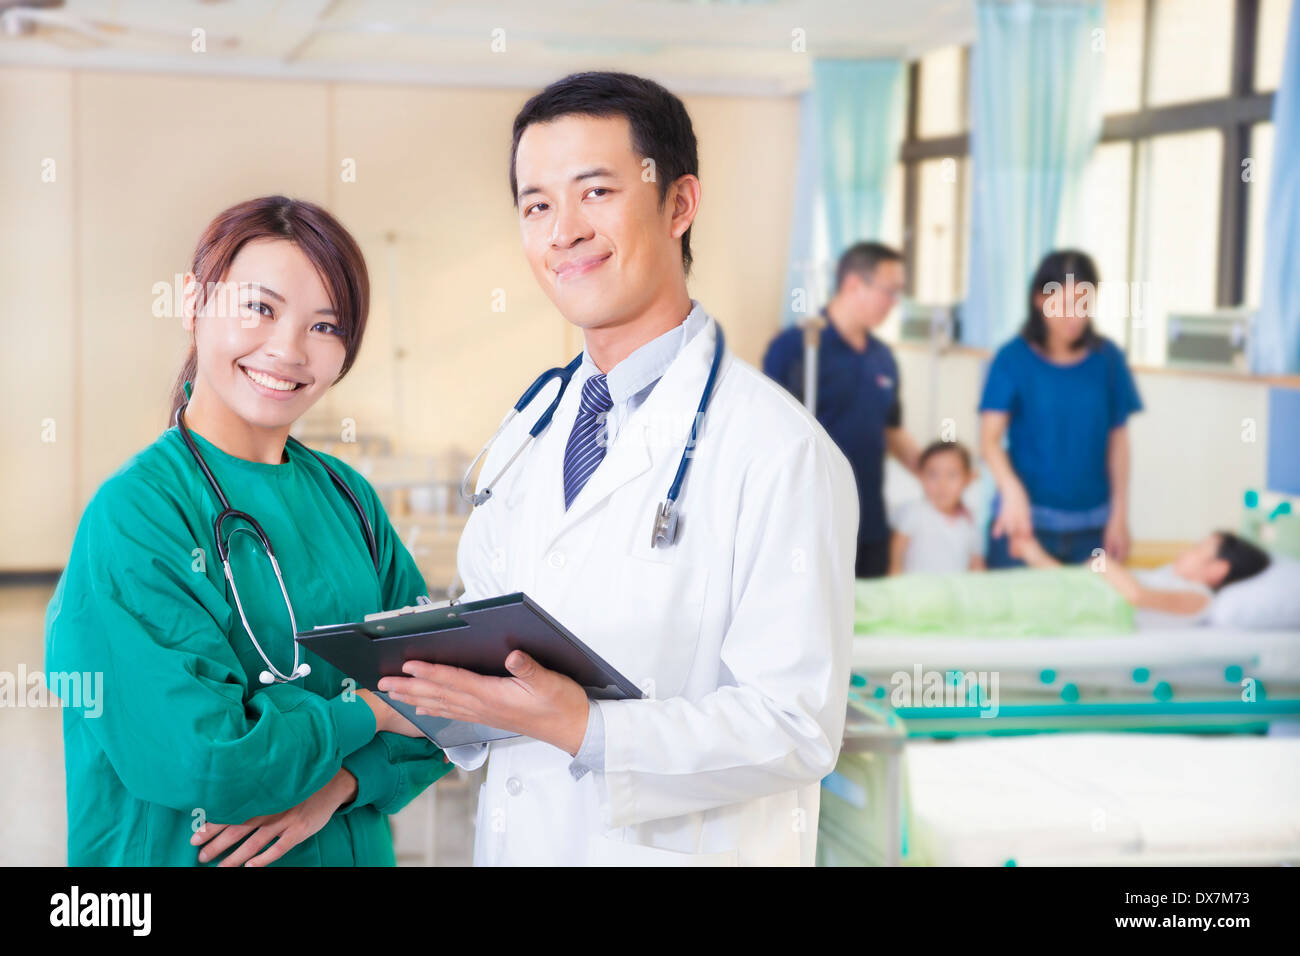 smiling doctor and assistant with patient in hospital Stock Photo